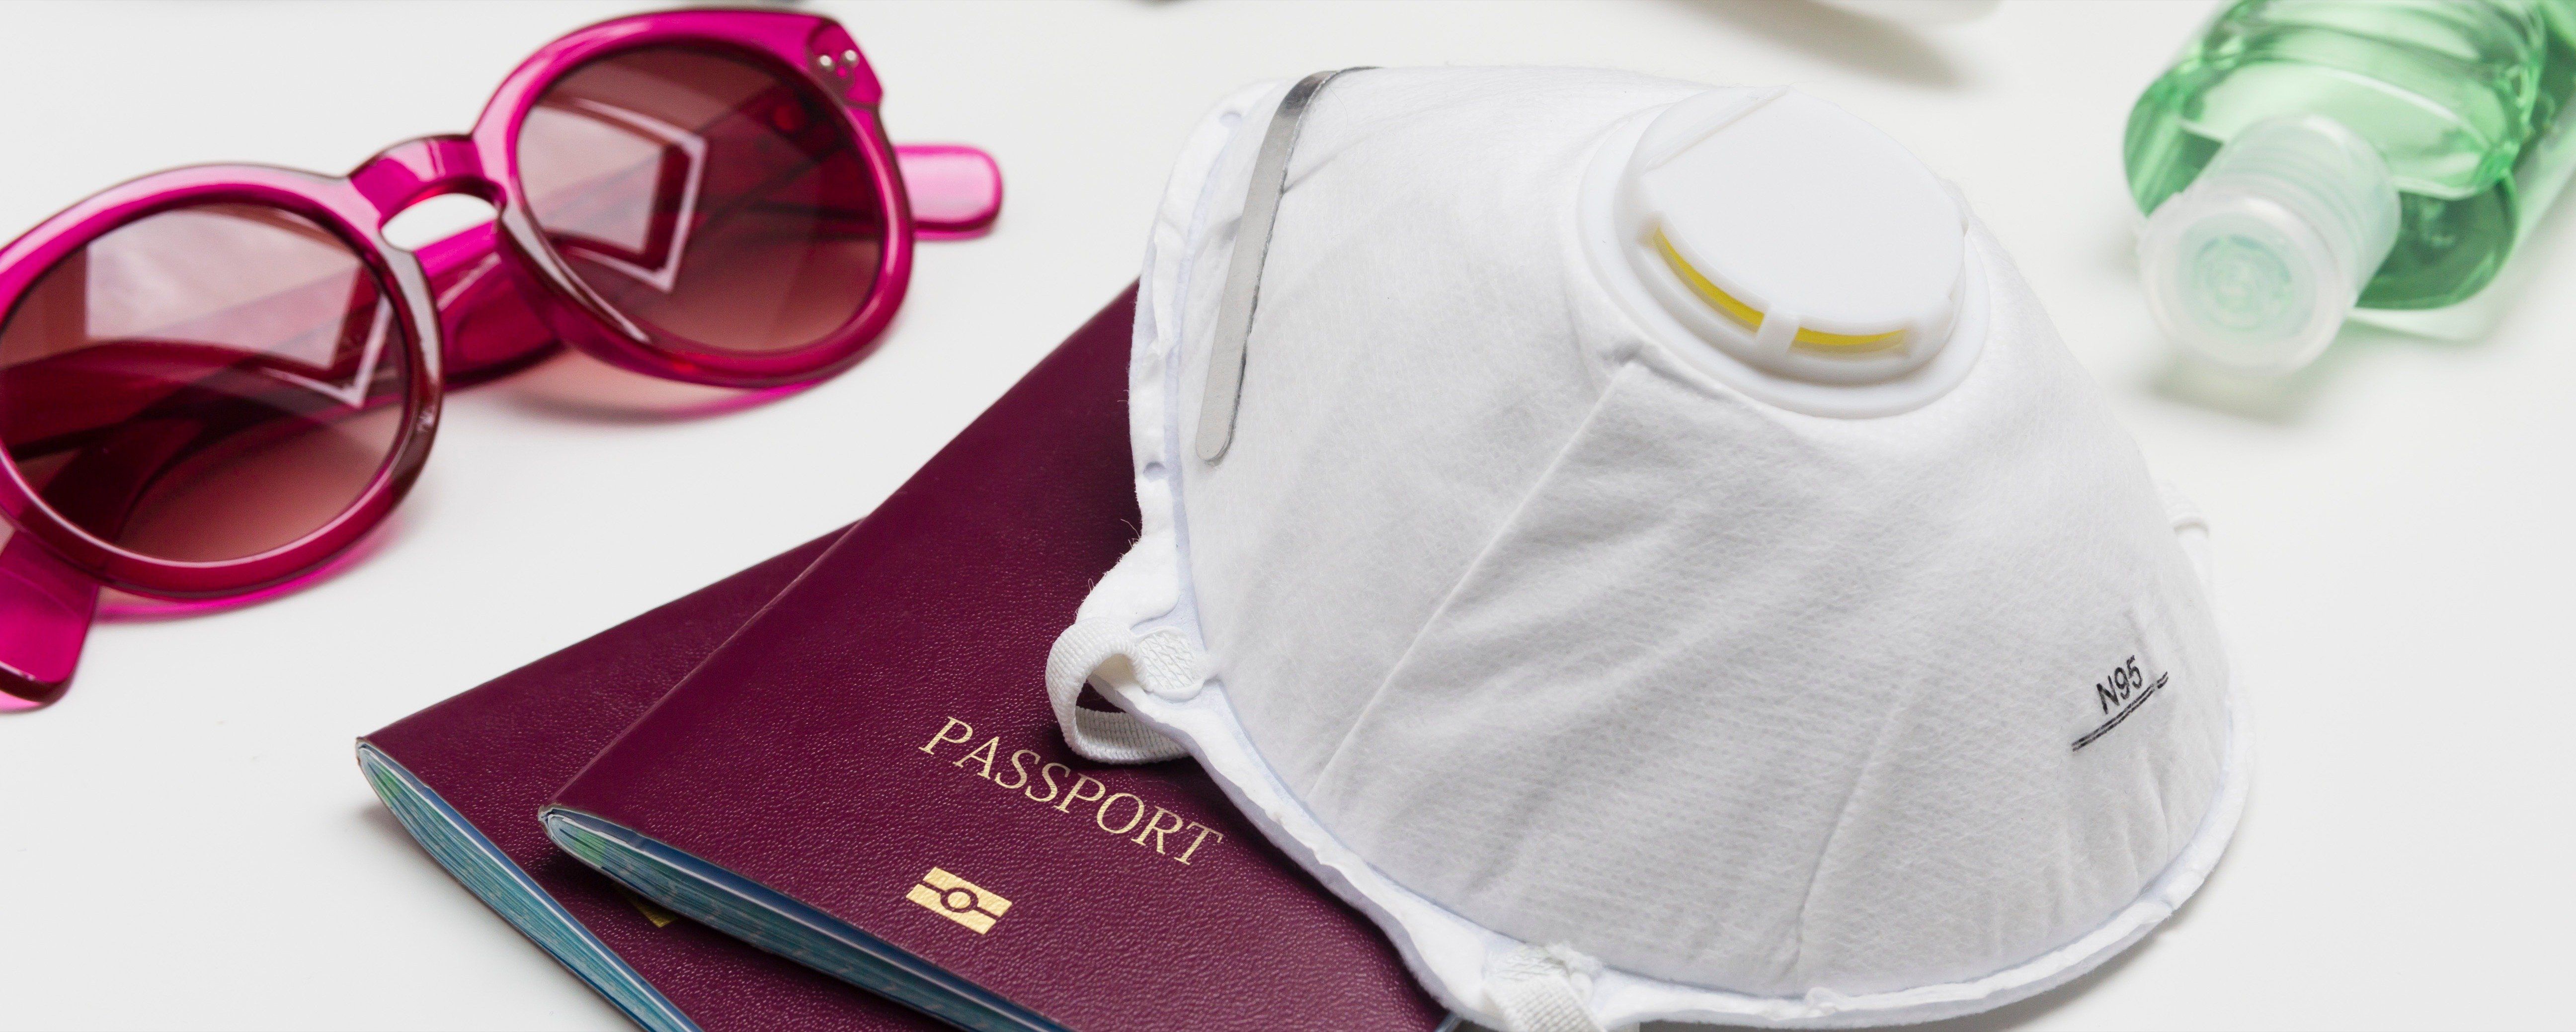 Travelling during the coronavirus outbreak. Passport with face mask, sunglasses and hand sanitizer gel.